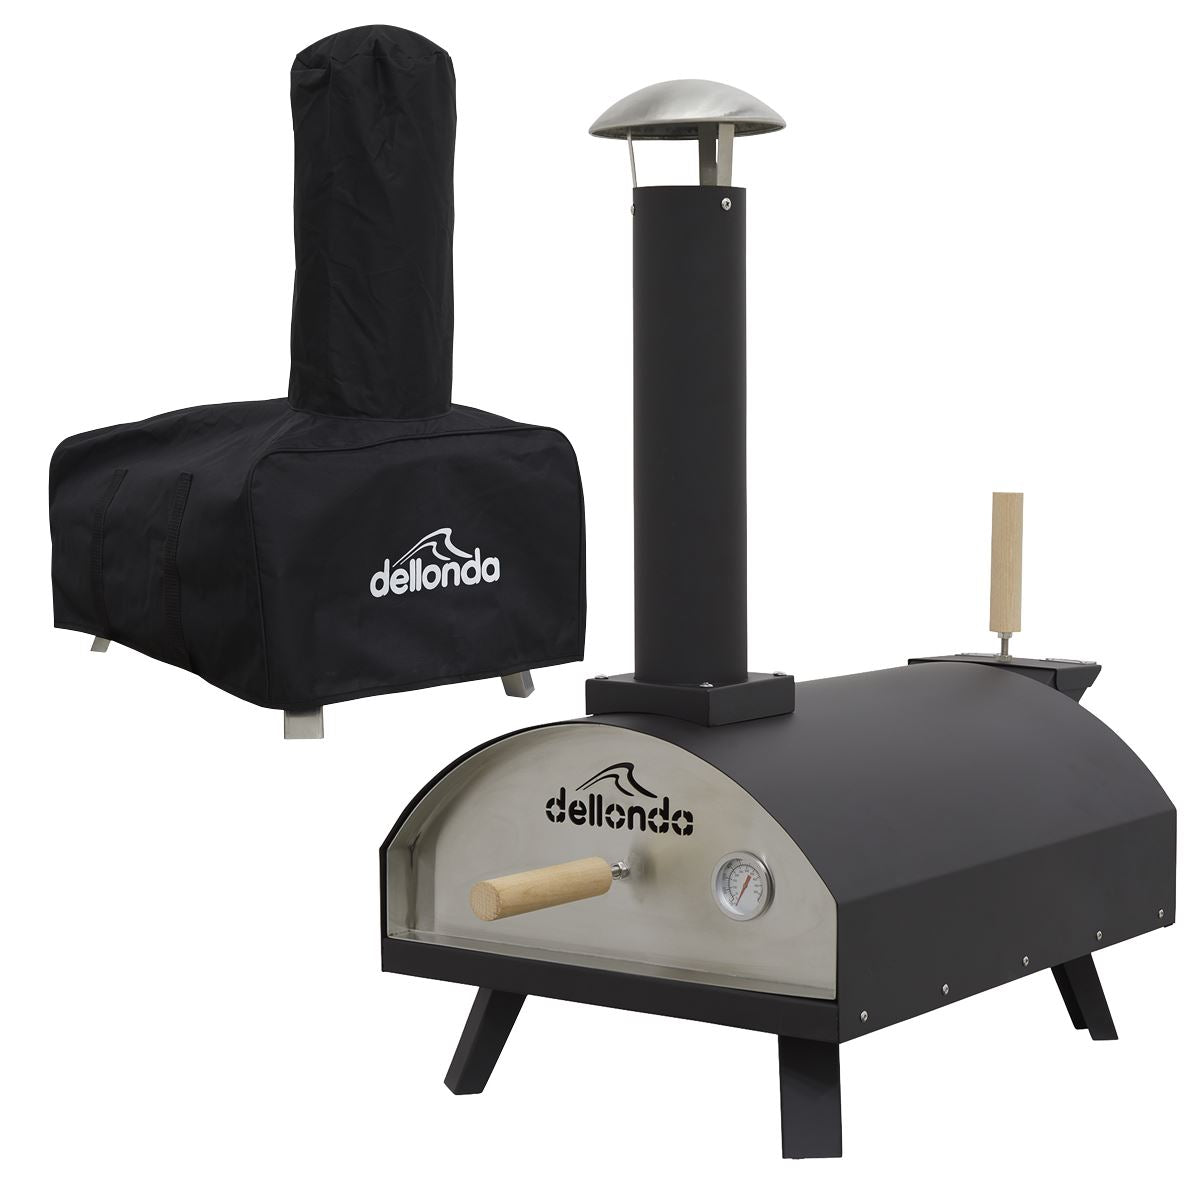 Dellonda Portable Wood-Fired Pizza Oven and Smoking Oven, Black/Stainless Steel, Supplied with Weatherproof Cover/Carry Bag